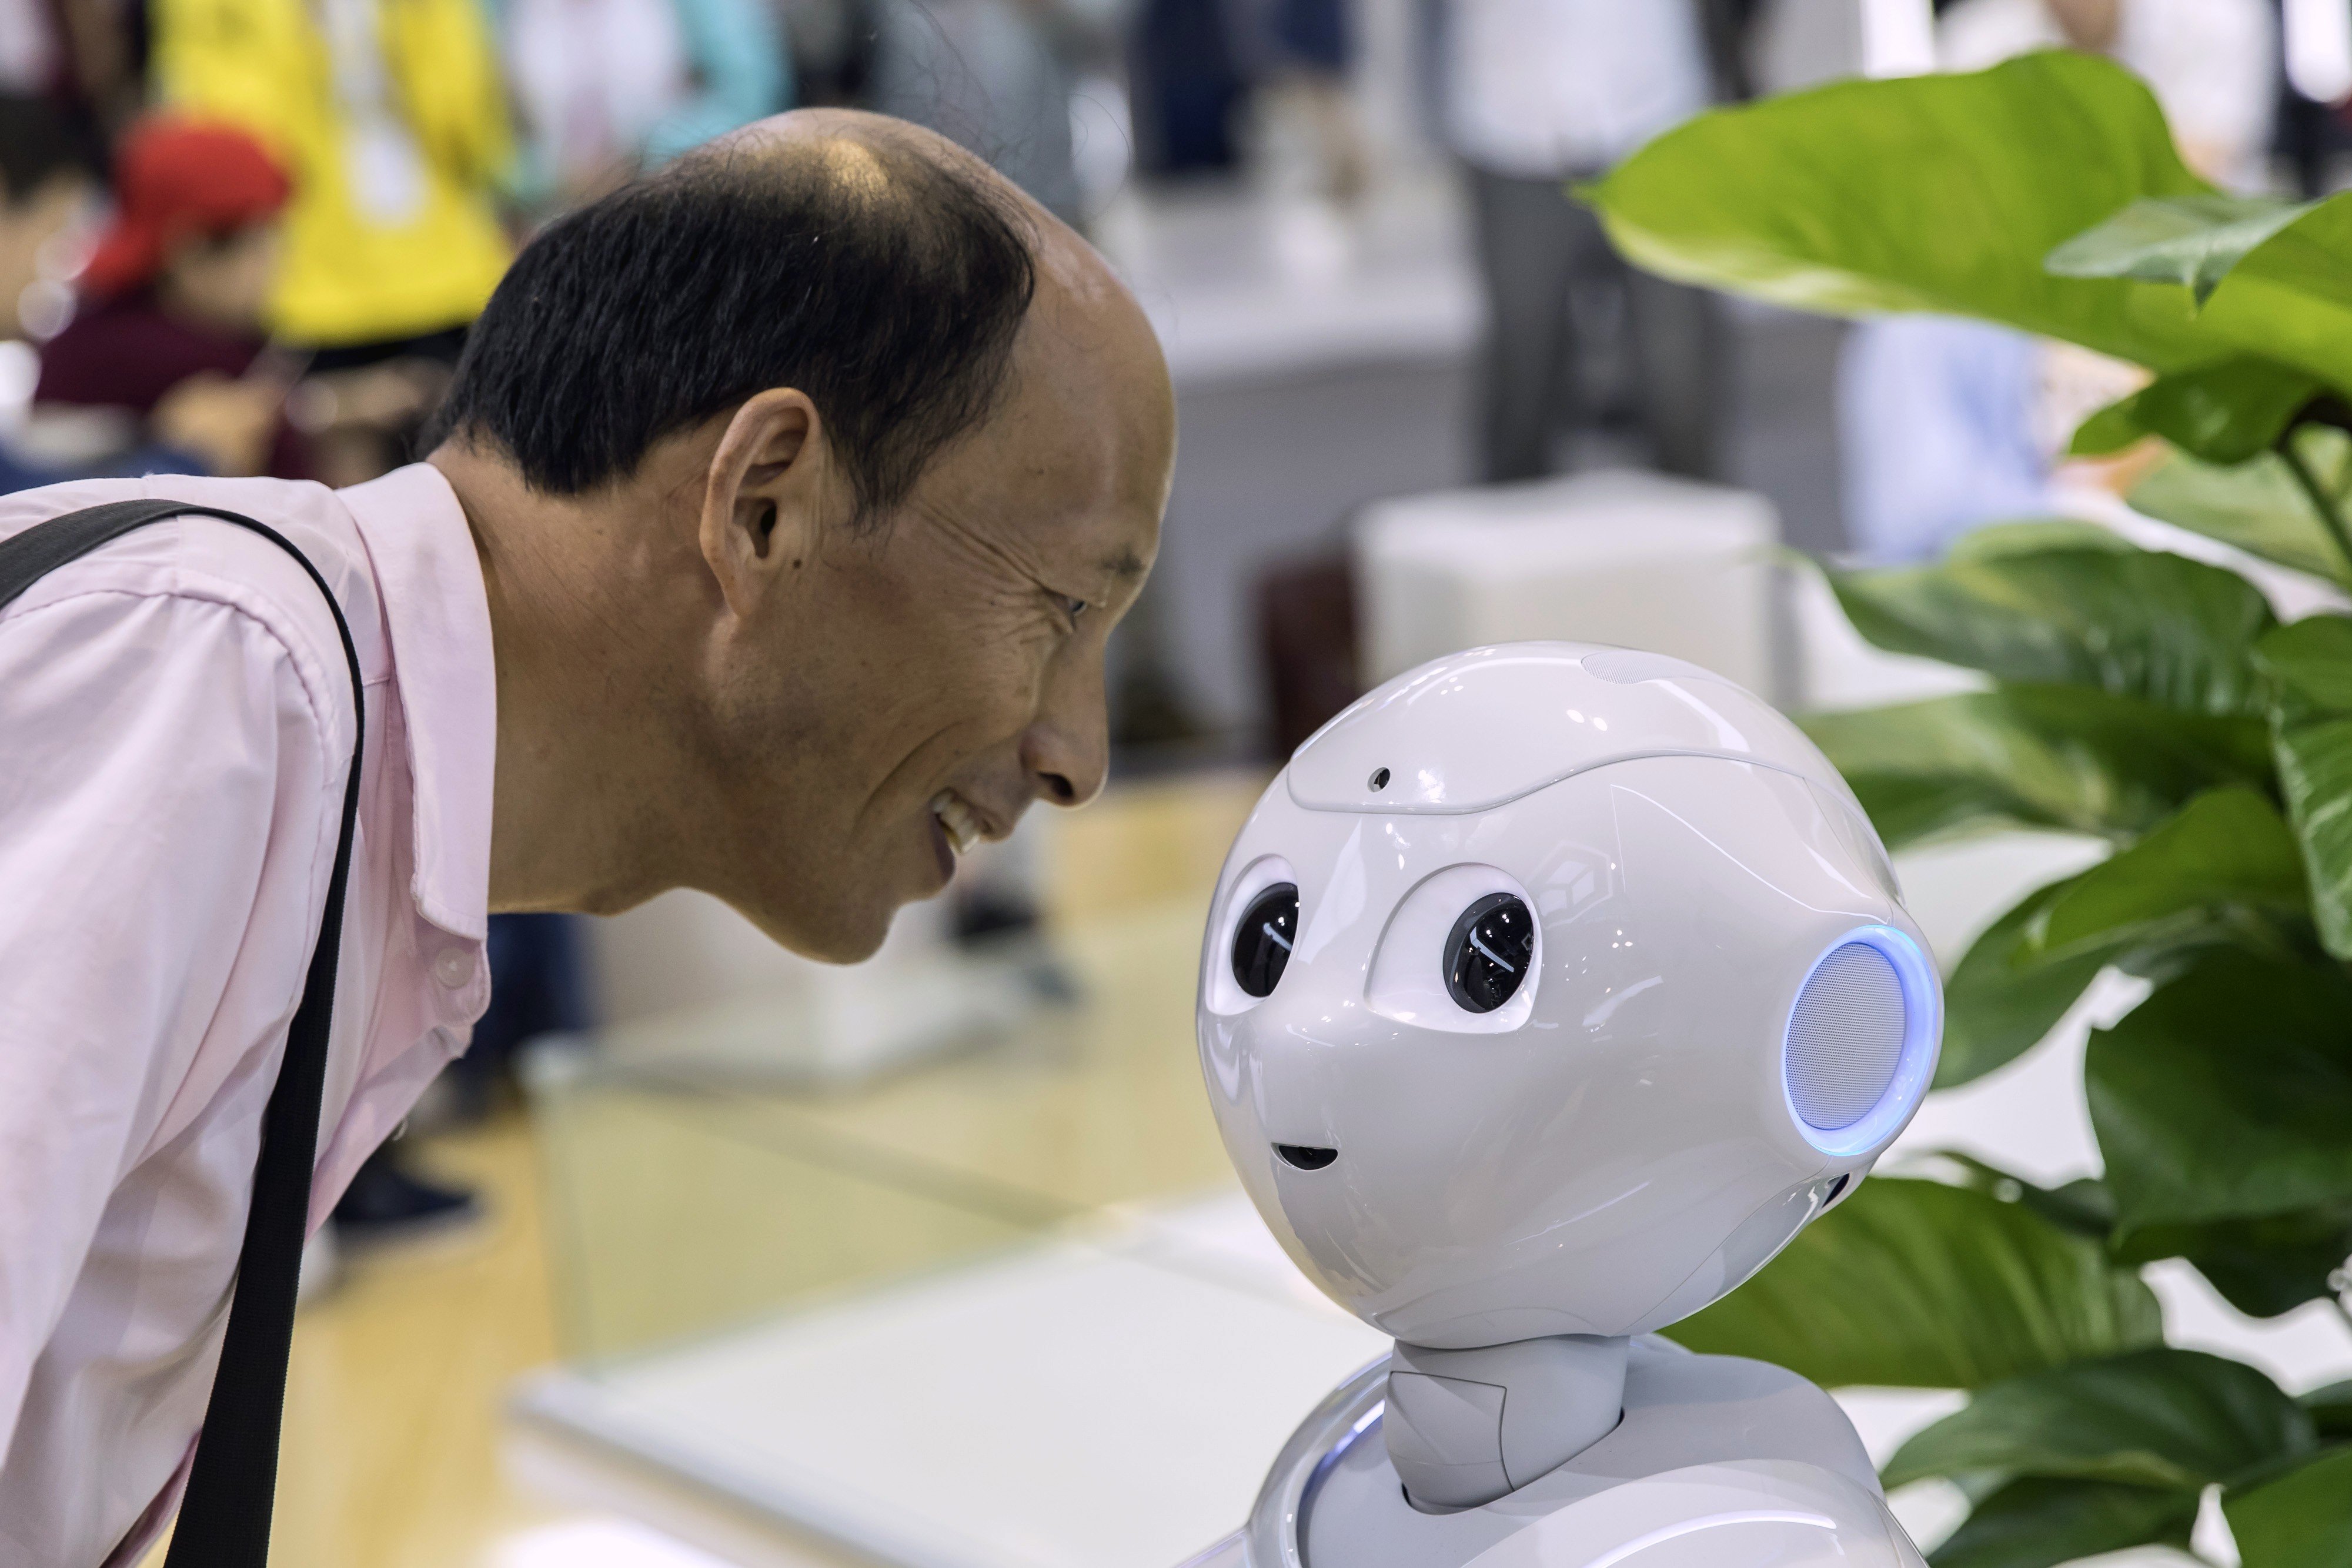 An attendee inspects Pepper, a semi-humanoid robot, at the World Artificial Intelligence Conference in Shanghai on August 29. Photo: Bloomberg